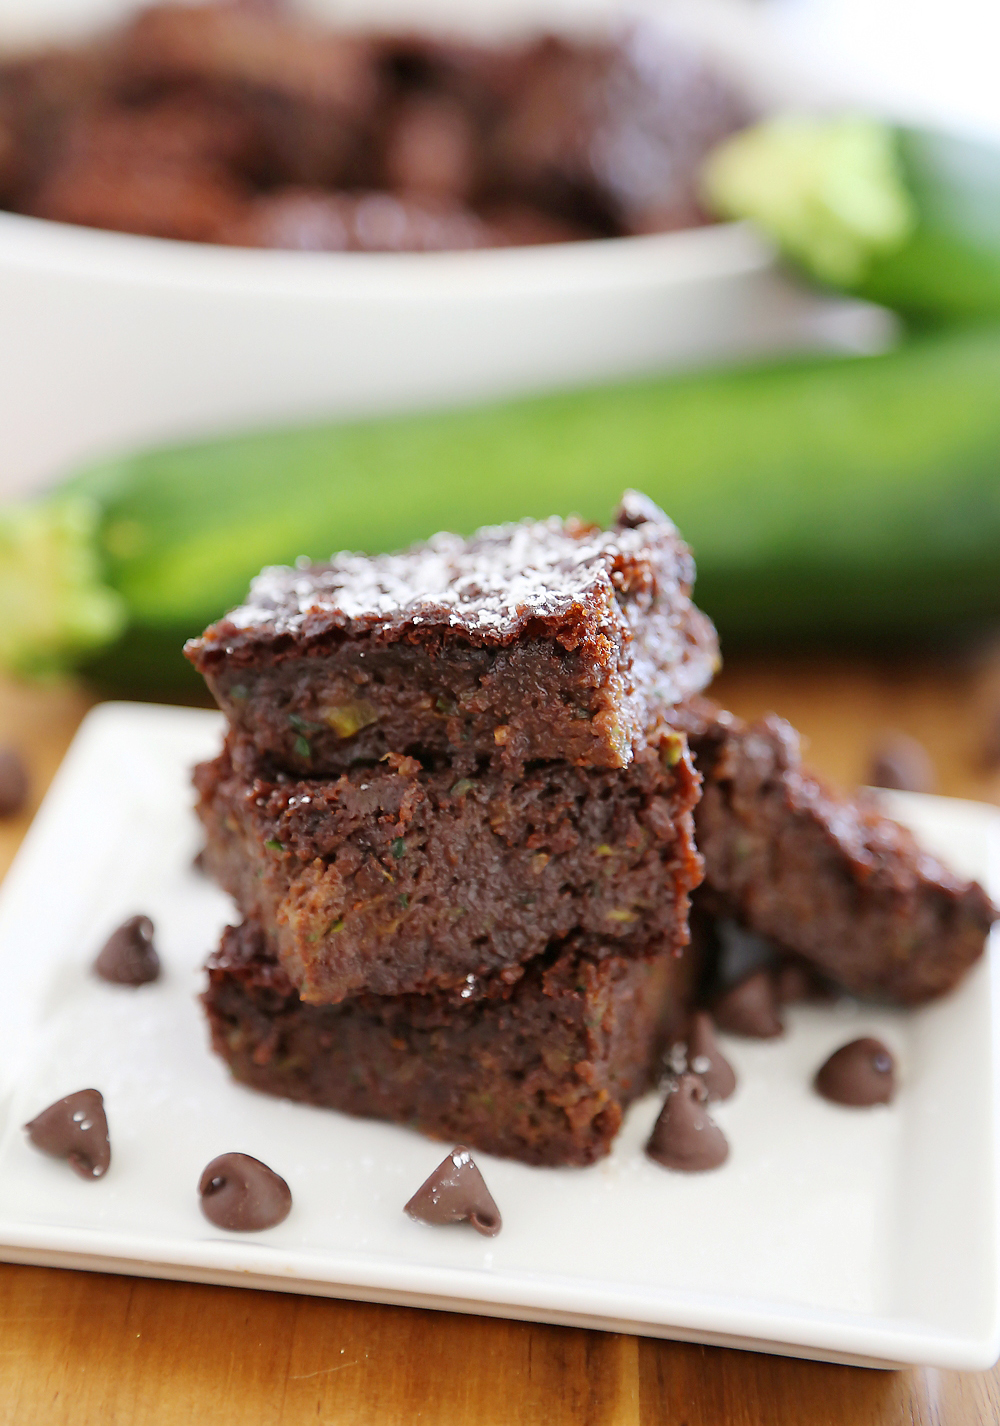 Flourless Zucchini Chocolate Brownies – Super gooey, fudgy chocolate brownies with easy-to-find ingredients! thecomfortofcooking.com